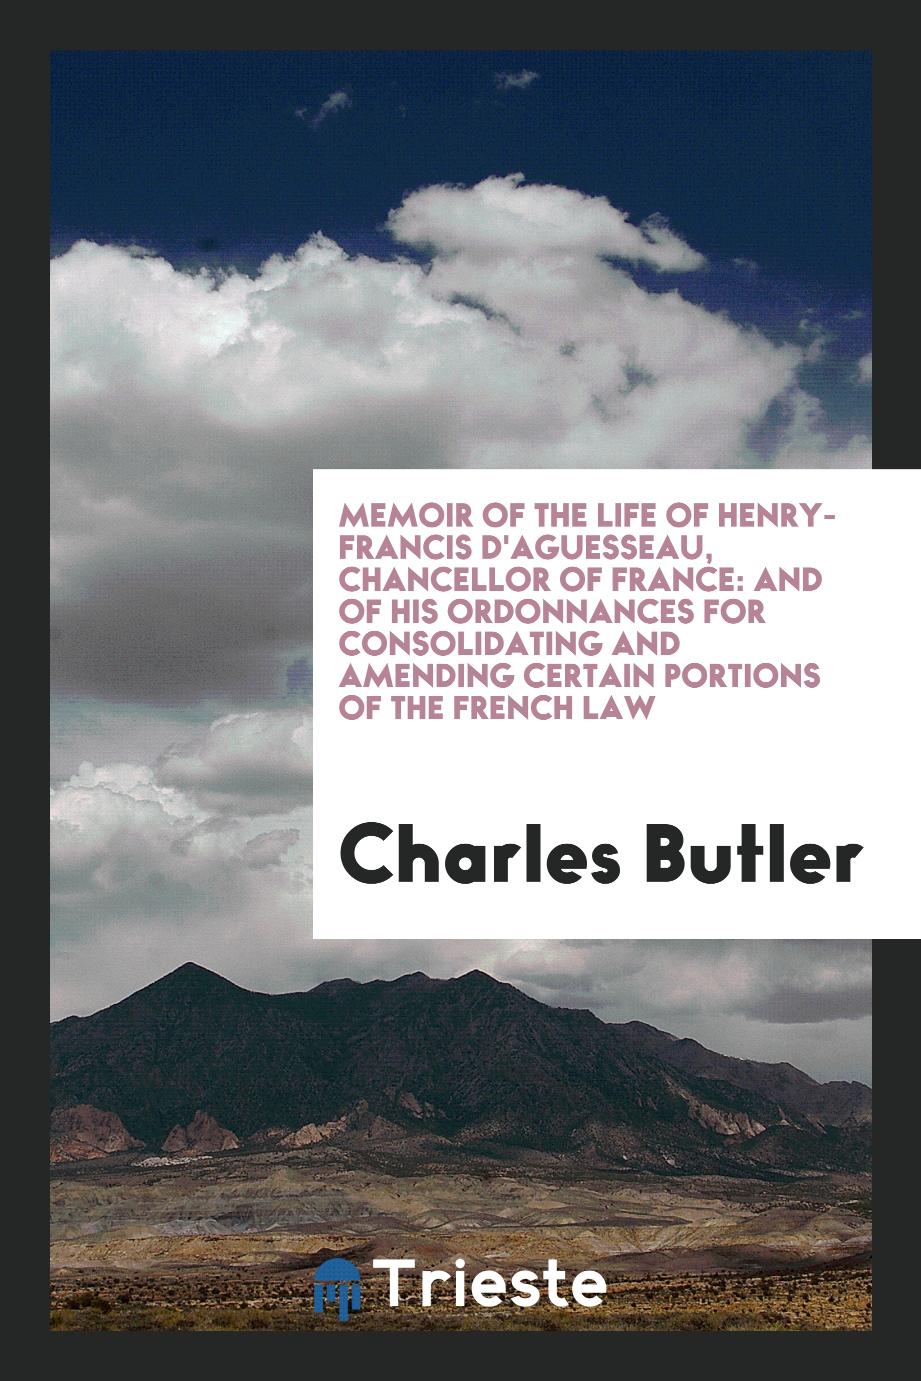 Memoir of the Life of Henry-Francis D'Aguesseau, Chancellor of France: And of His Ordonnances for Consolidating and Amending Certain Portions of the French Law